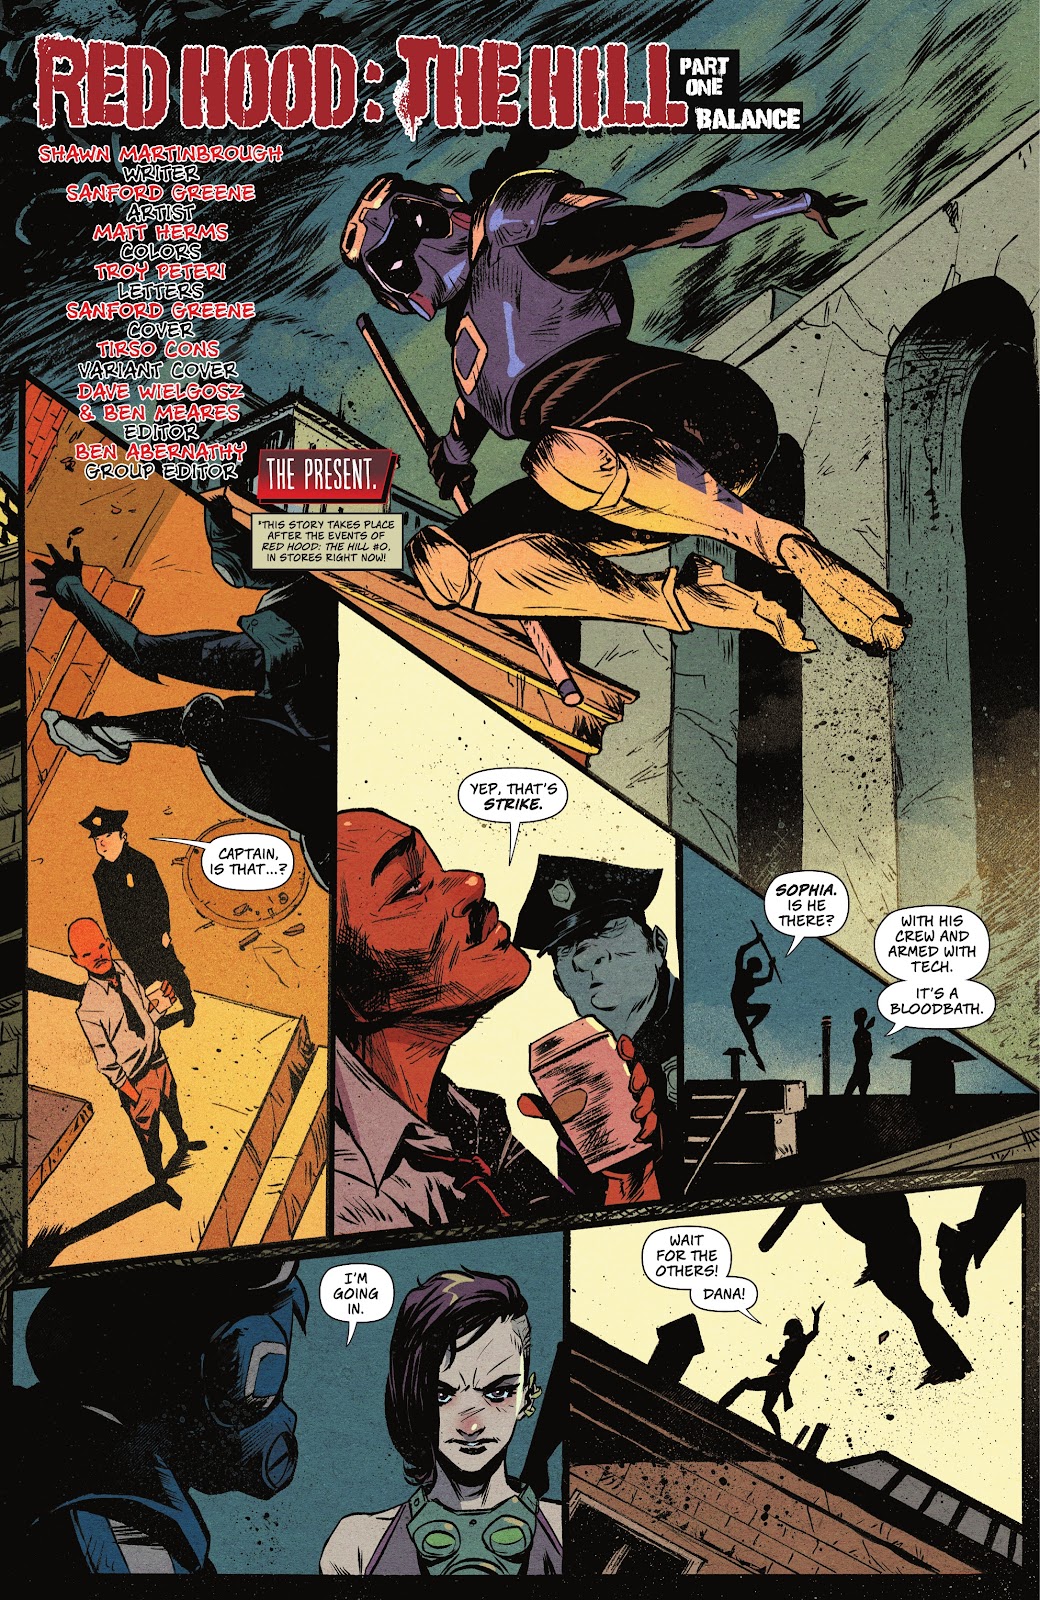 Red Hood: The Hill issue 1 - Page 10